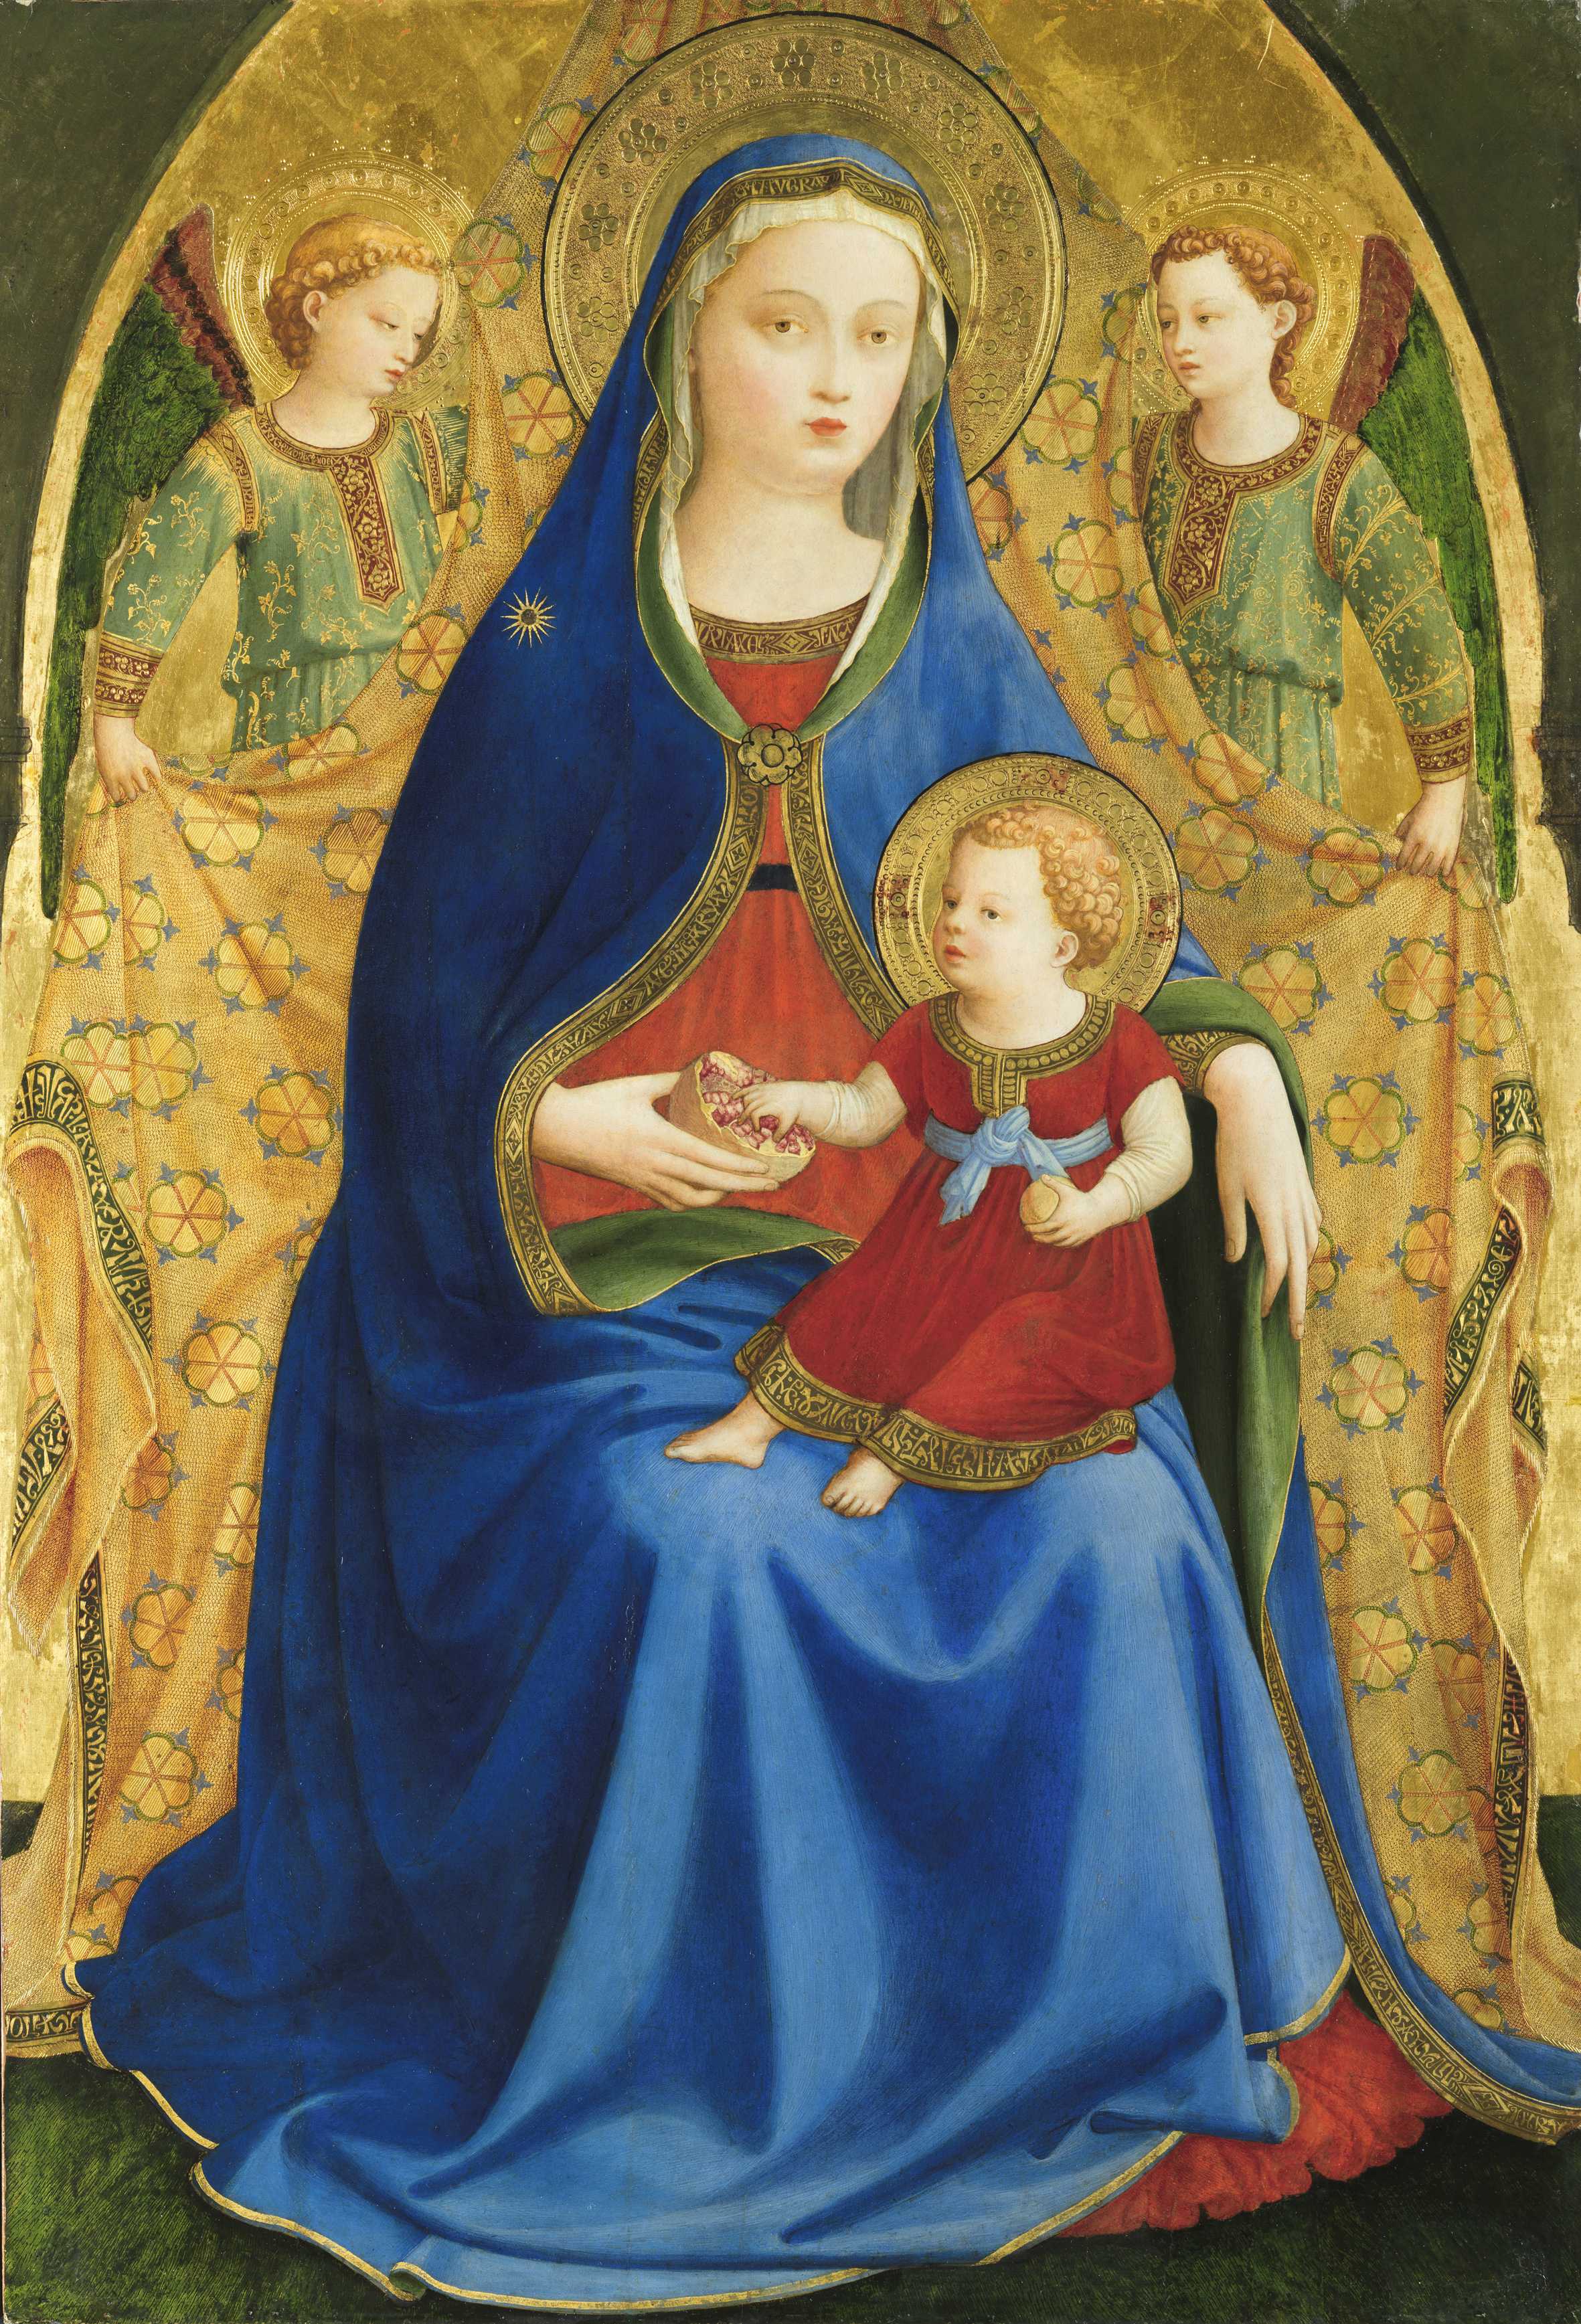 The Virgin and Child with two Angels or The Virgin with a Pomegranate Guido di Pietro, called Fra Angélico Témpera on panel c. 1426 Madrid, Museo Nacional del Prado. Adquisición 2016 (con la colaboración de la Fundación Amigos del Museo del Prado)